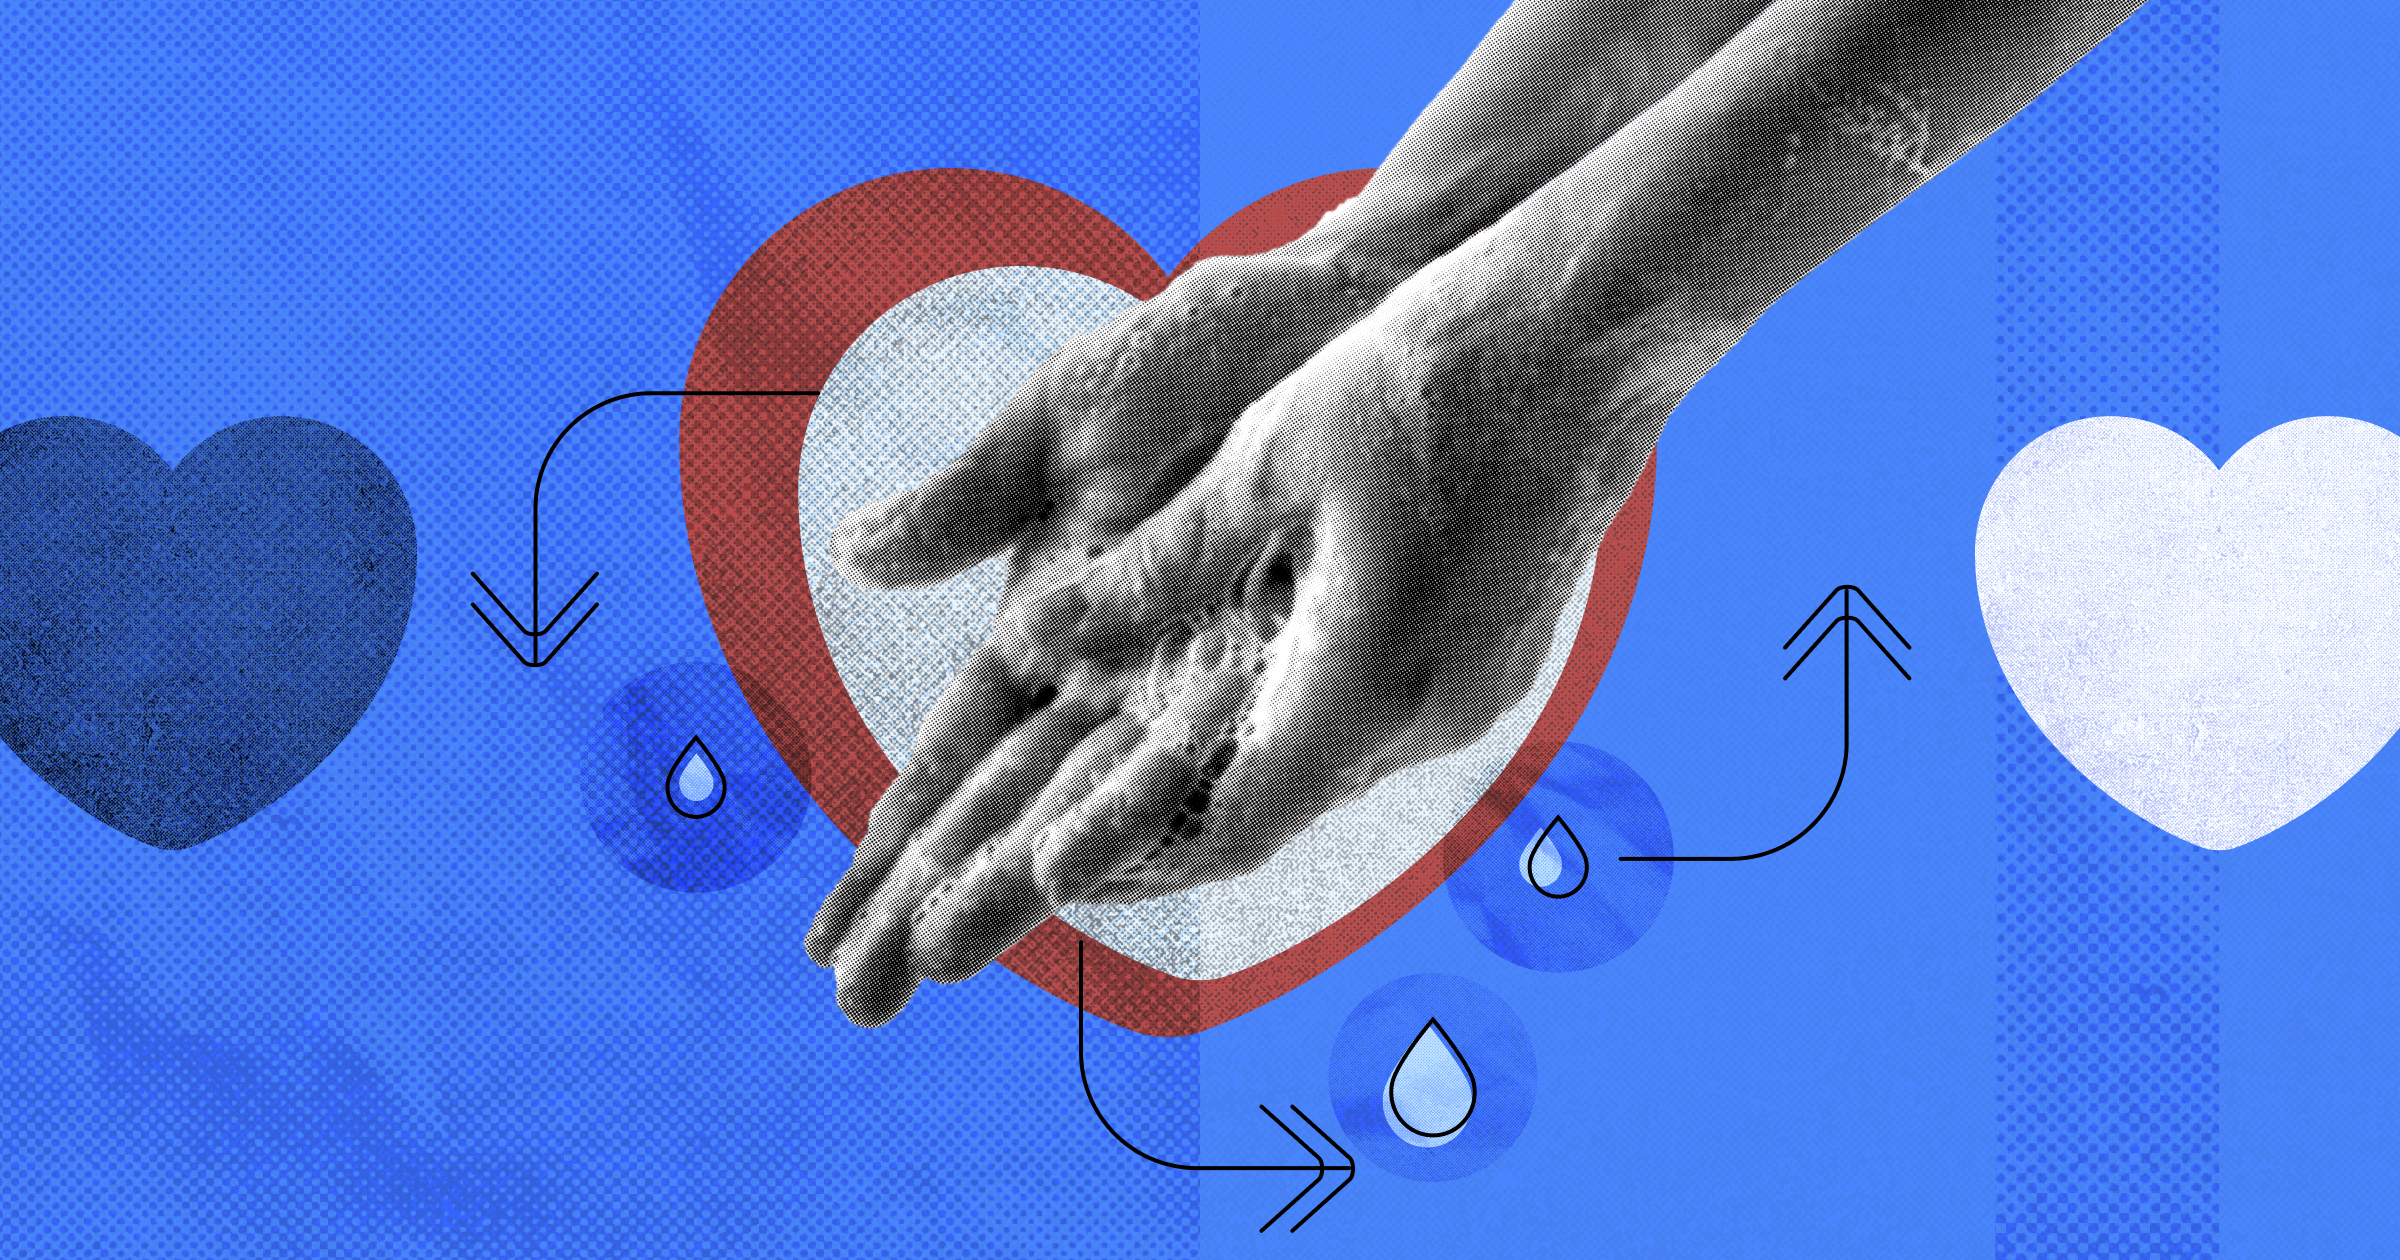 A person's hand placed on top of a heart symbol, surrounded by water droplets and arrows. The image represents the idea of spiritual renewal through the act of confession, symbolized by the heart and the water droplets, which represent cleansing and purification.